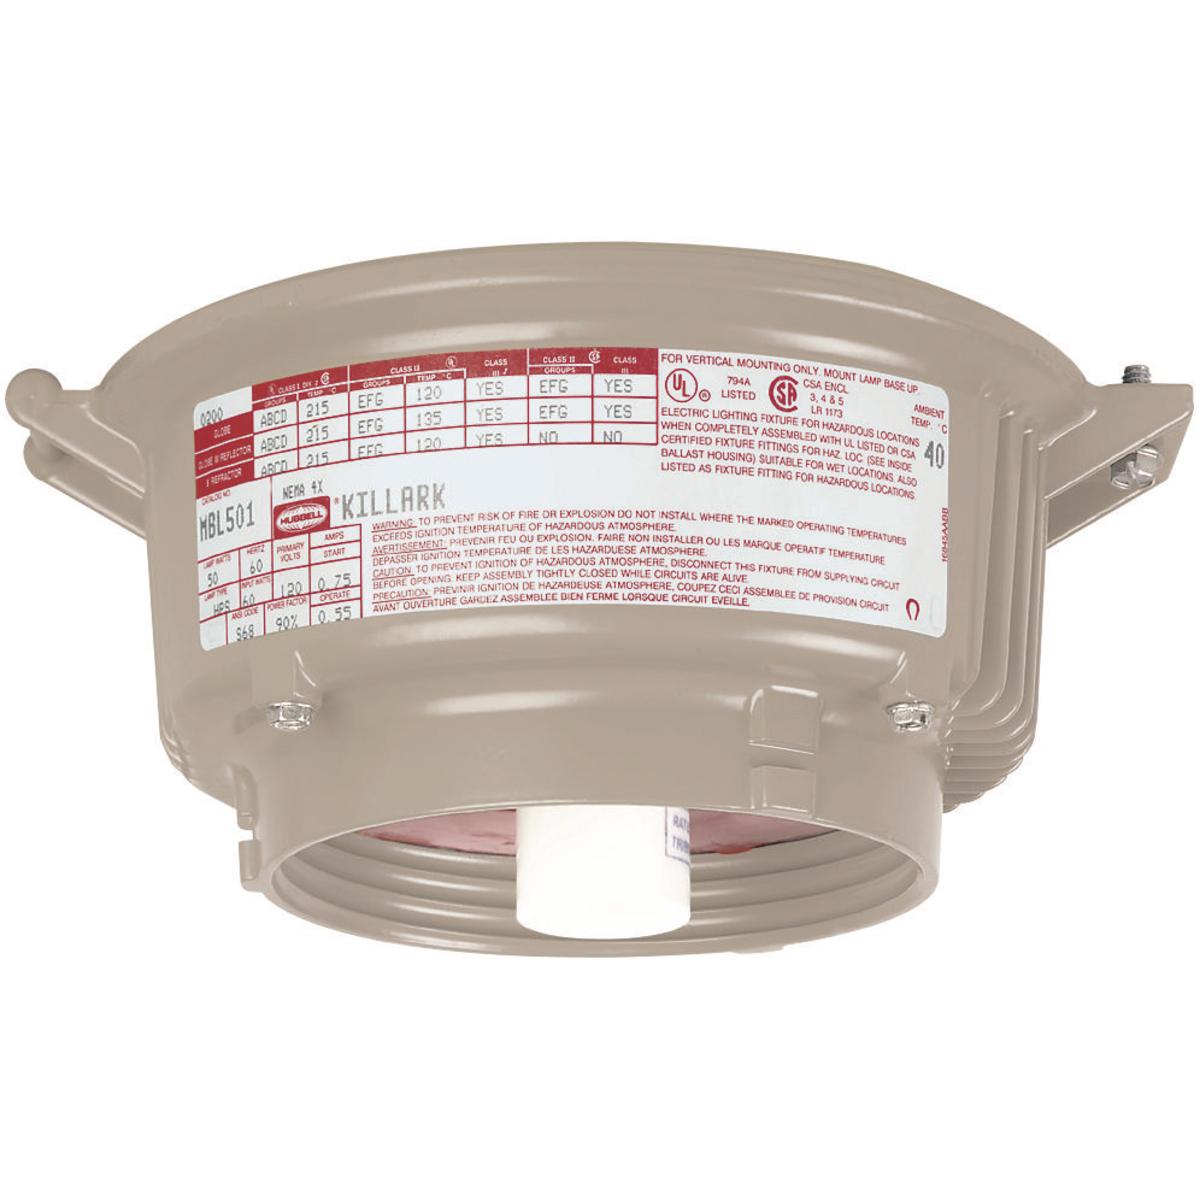 Hubbell MBL151 MB Series - Aluminum 150 Watt Medium Base High Pressure Sodium HID Light Fixture (Lamp Not Included) - 120V At 60Hz  ; Ballast tank and splice box – corrosion resistant copper-free aluminum alloy ; Baked powder epoxy/polyester finish, electrostatically ap